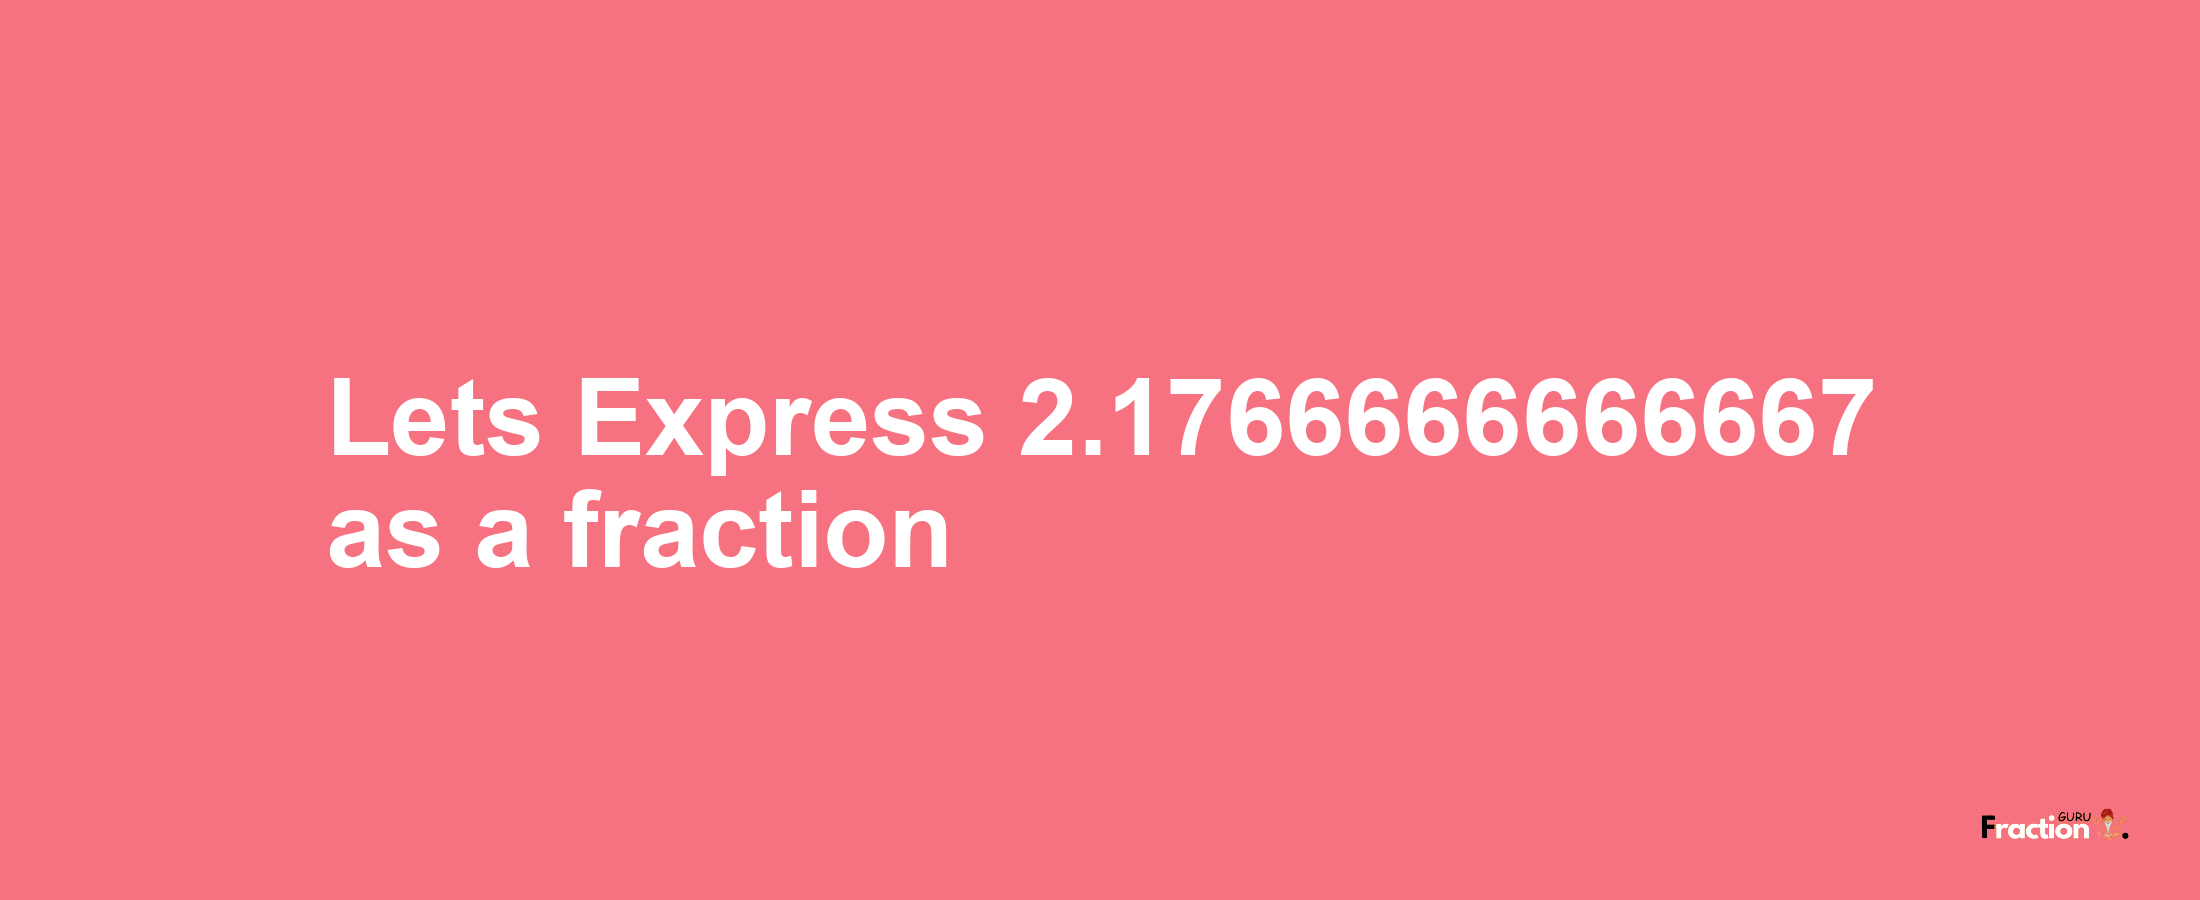 Lets Express 2.1766666666667 as afraction